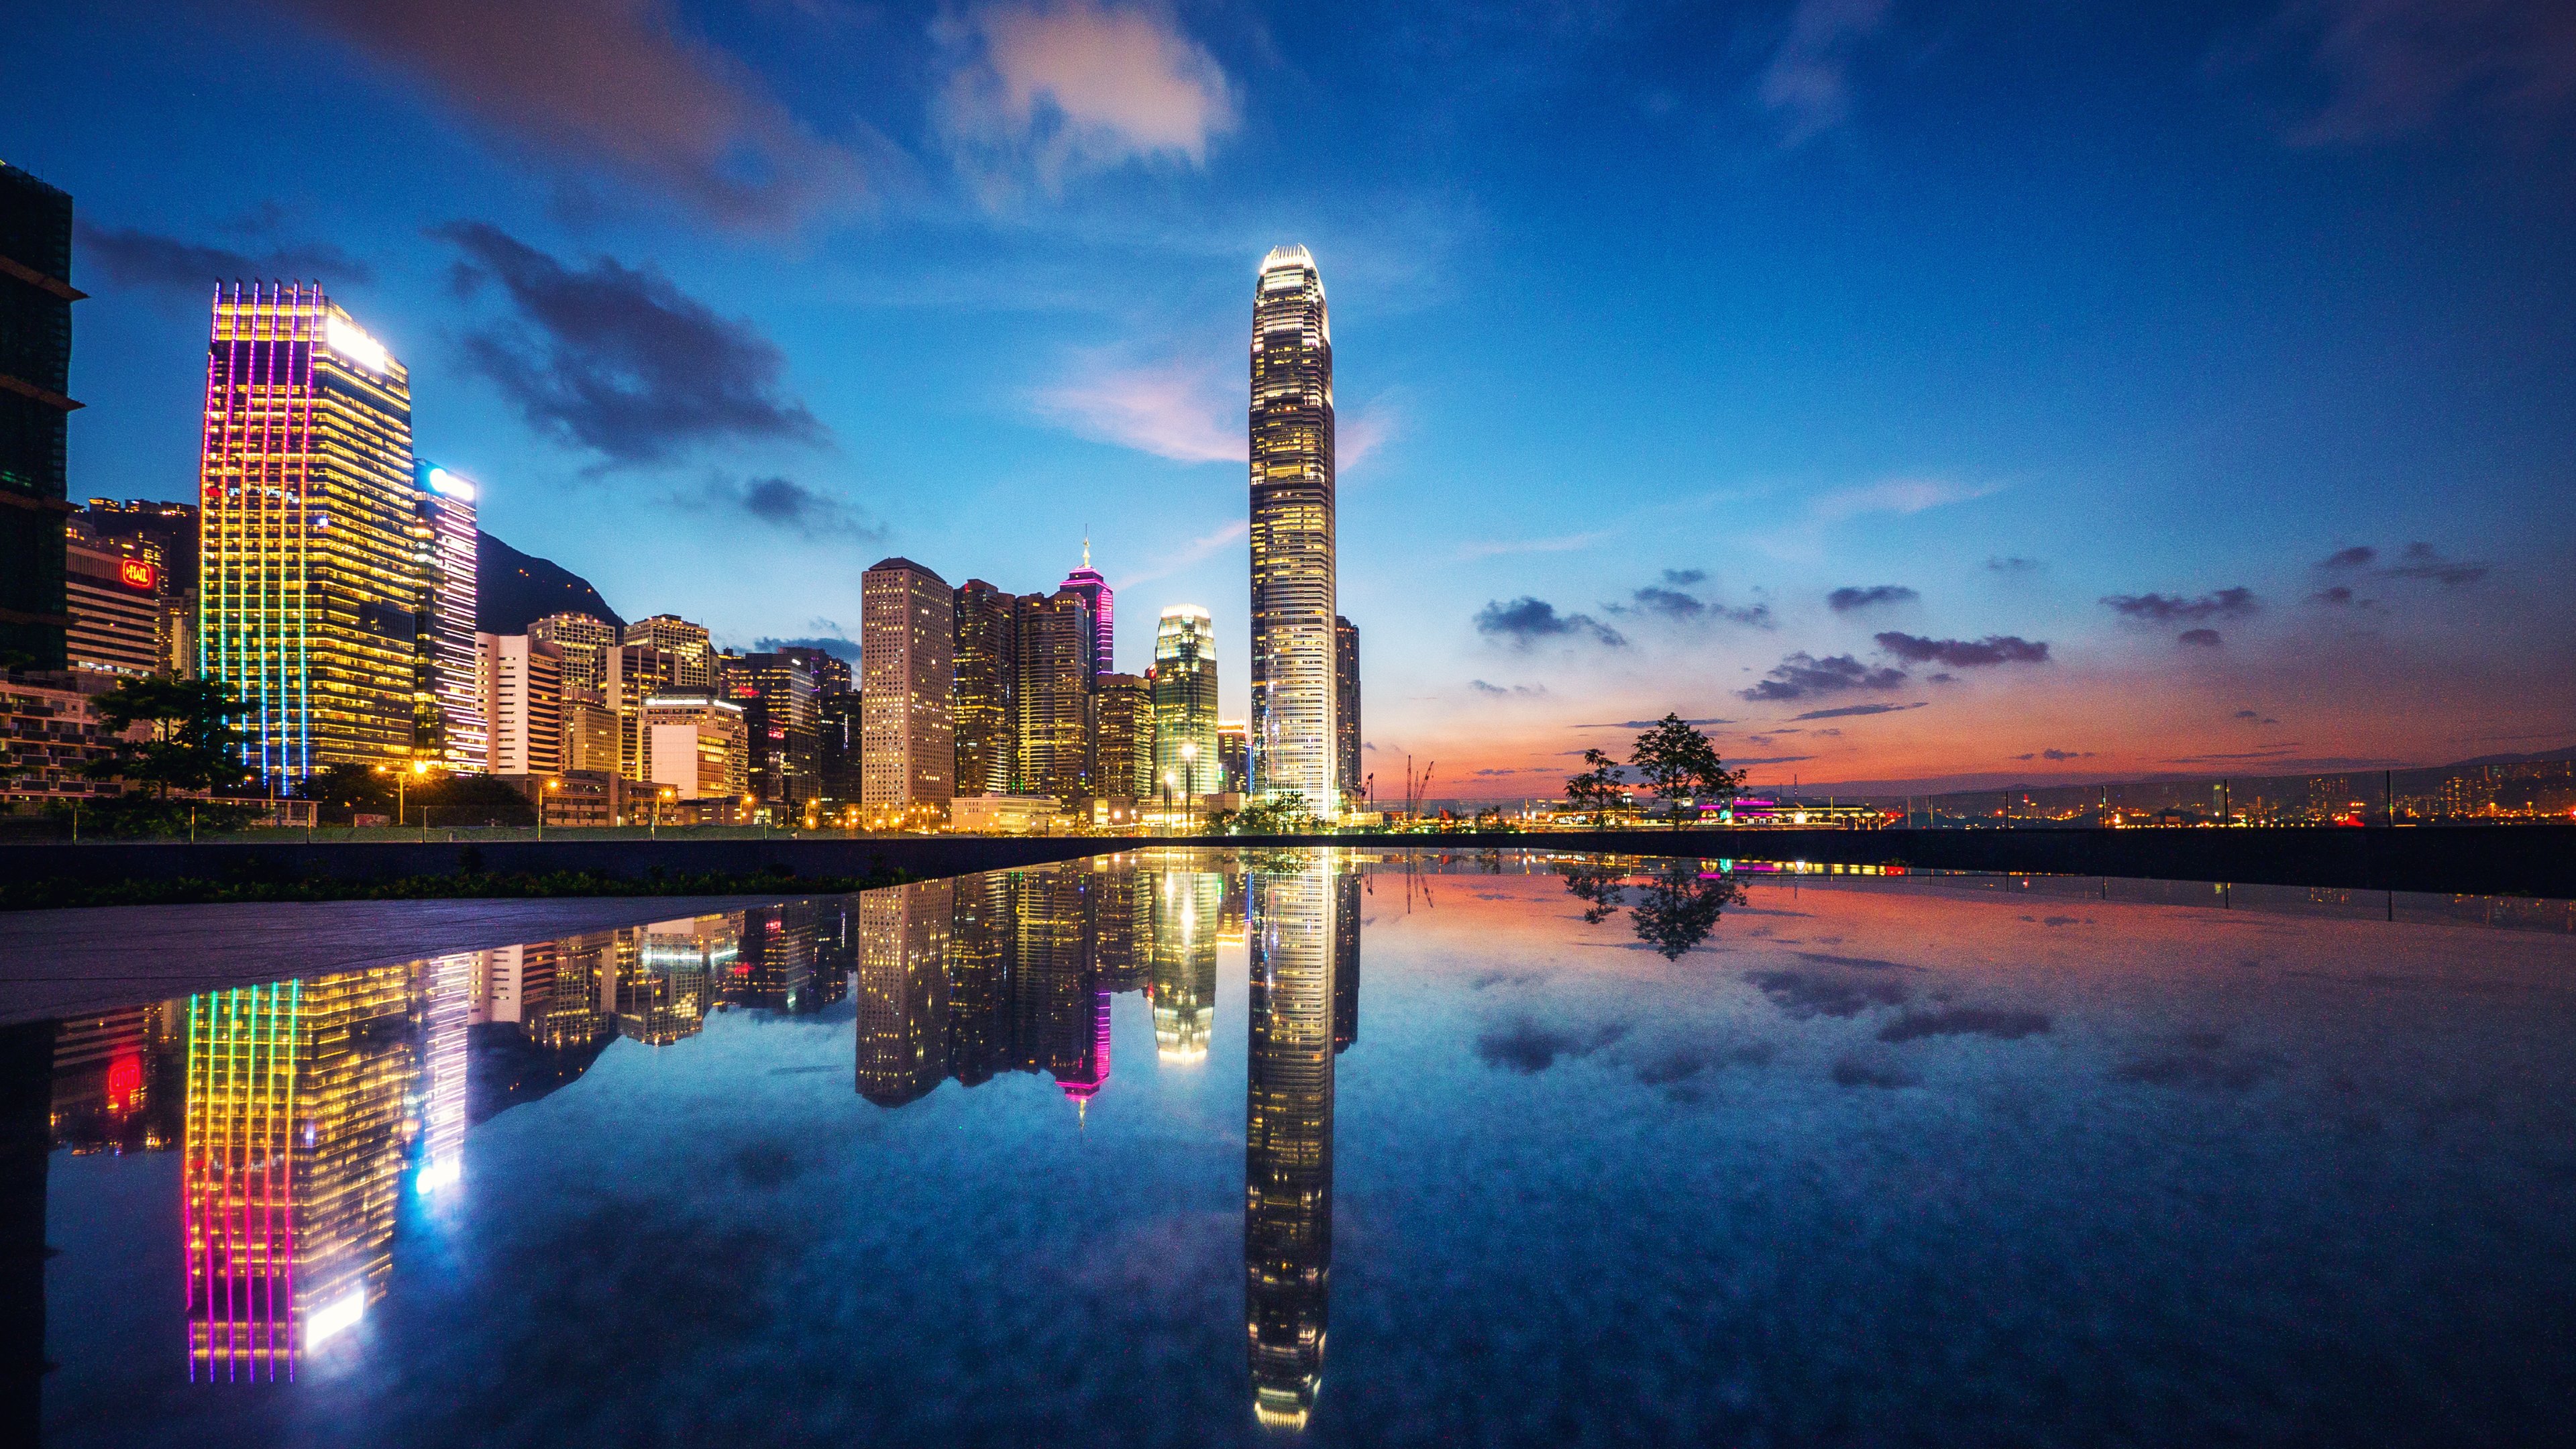 hong kong, man made, architecture, cities, reflection, building, cityscape, twilight UHD